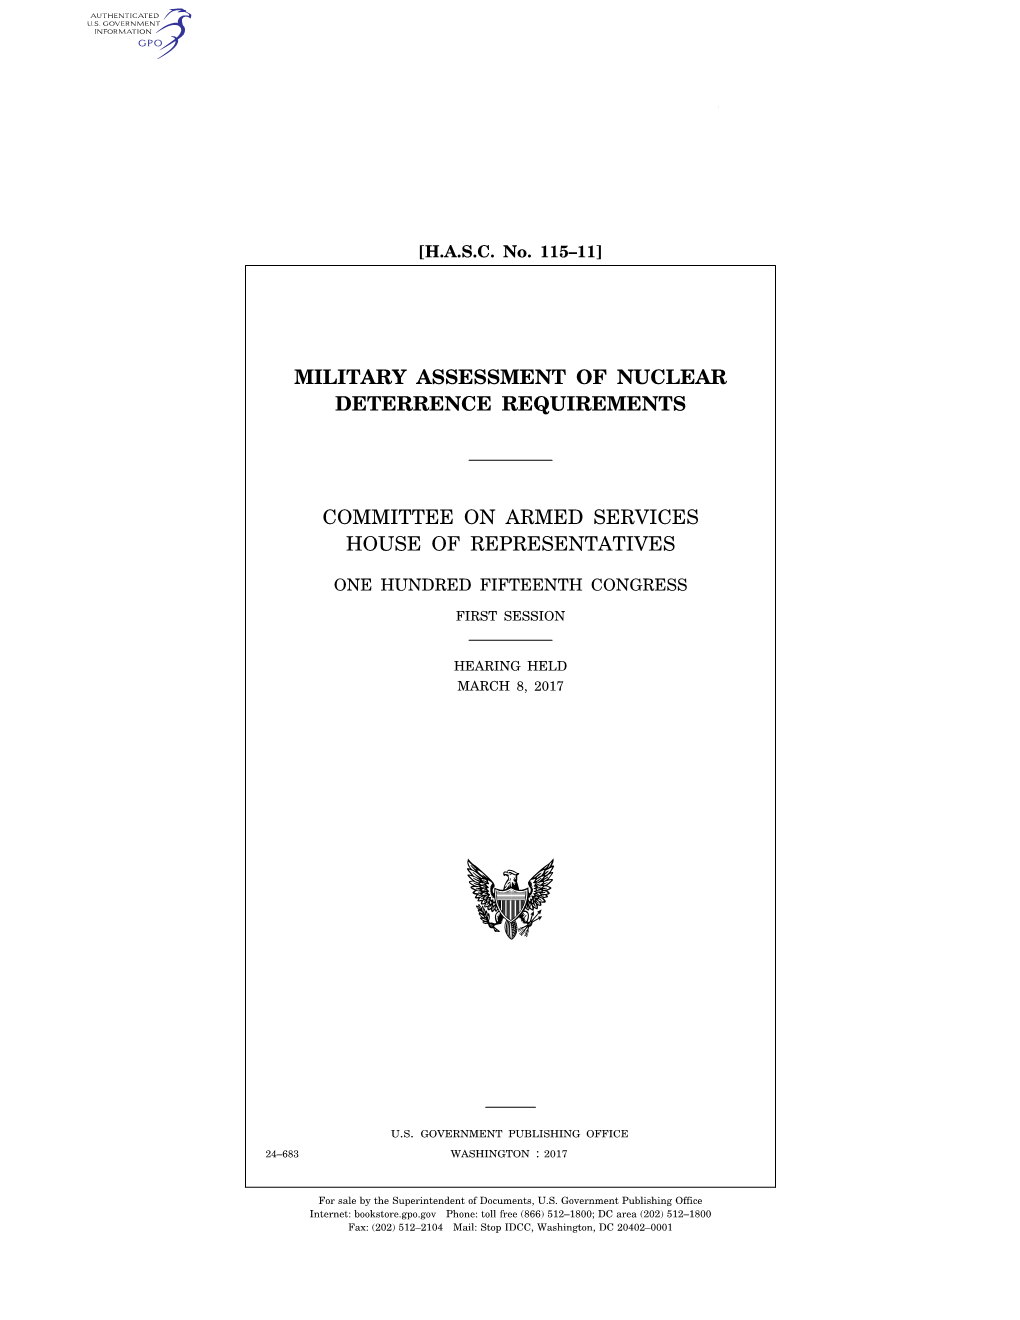 Military Assessment of Nuclear Deterrence Requirements Committee